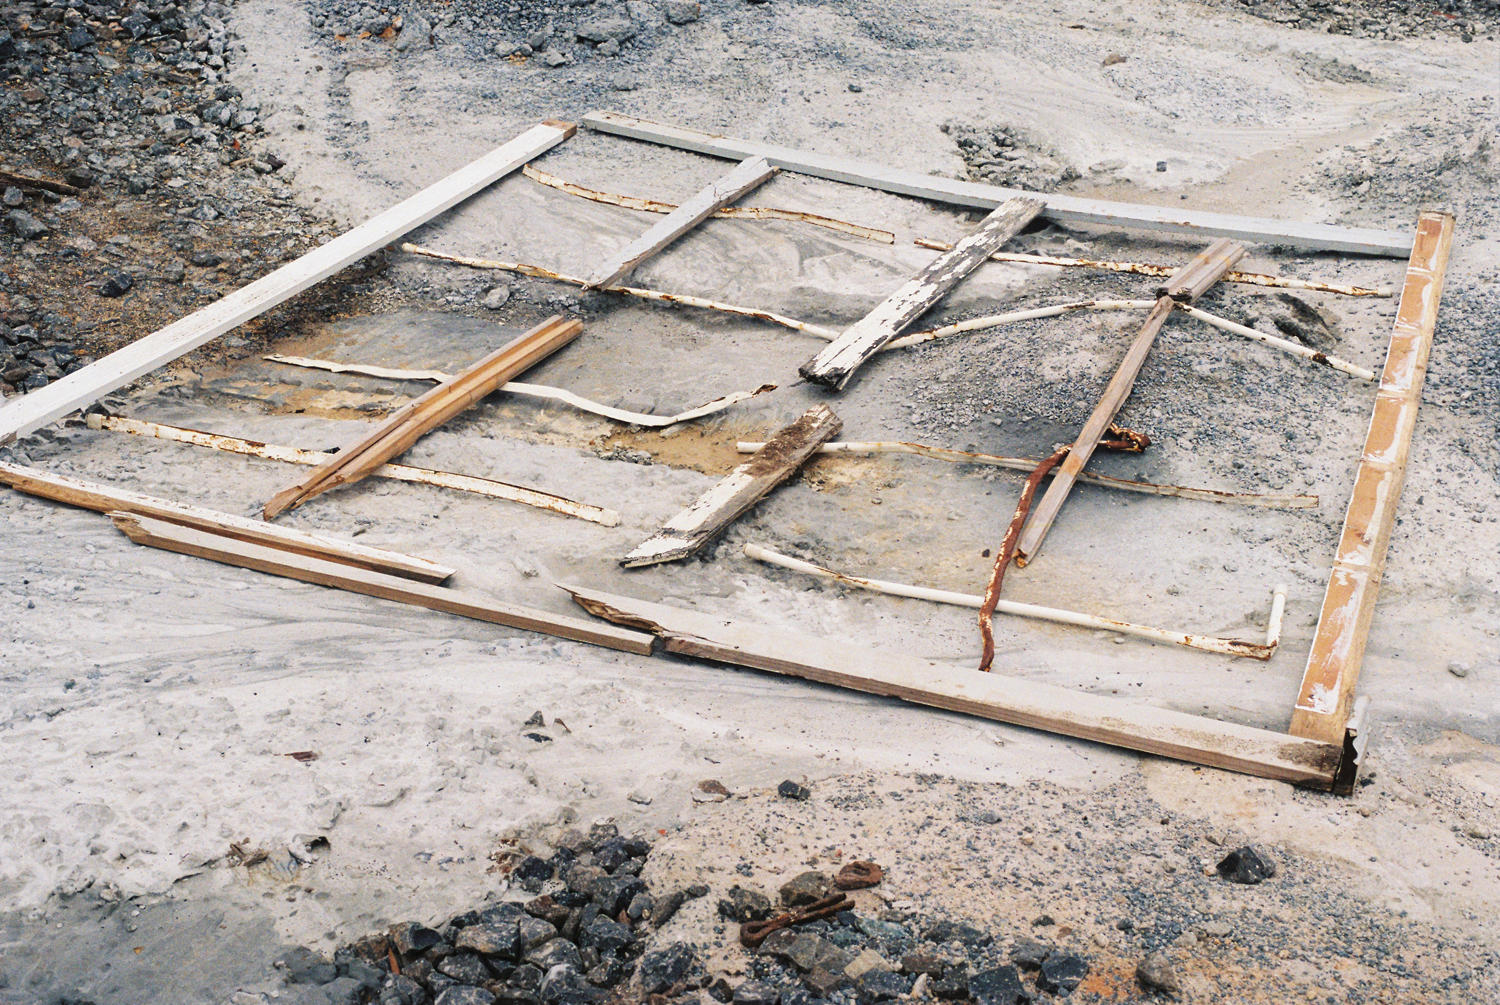 A documentation of an archaeological grid, mapping the surface at a site with found materials